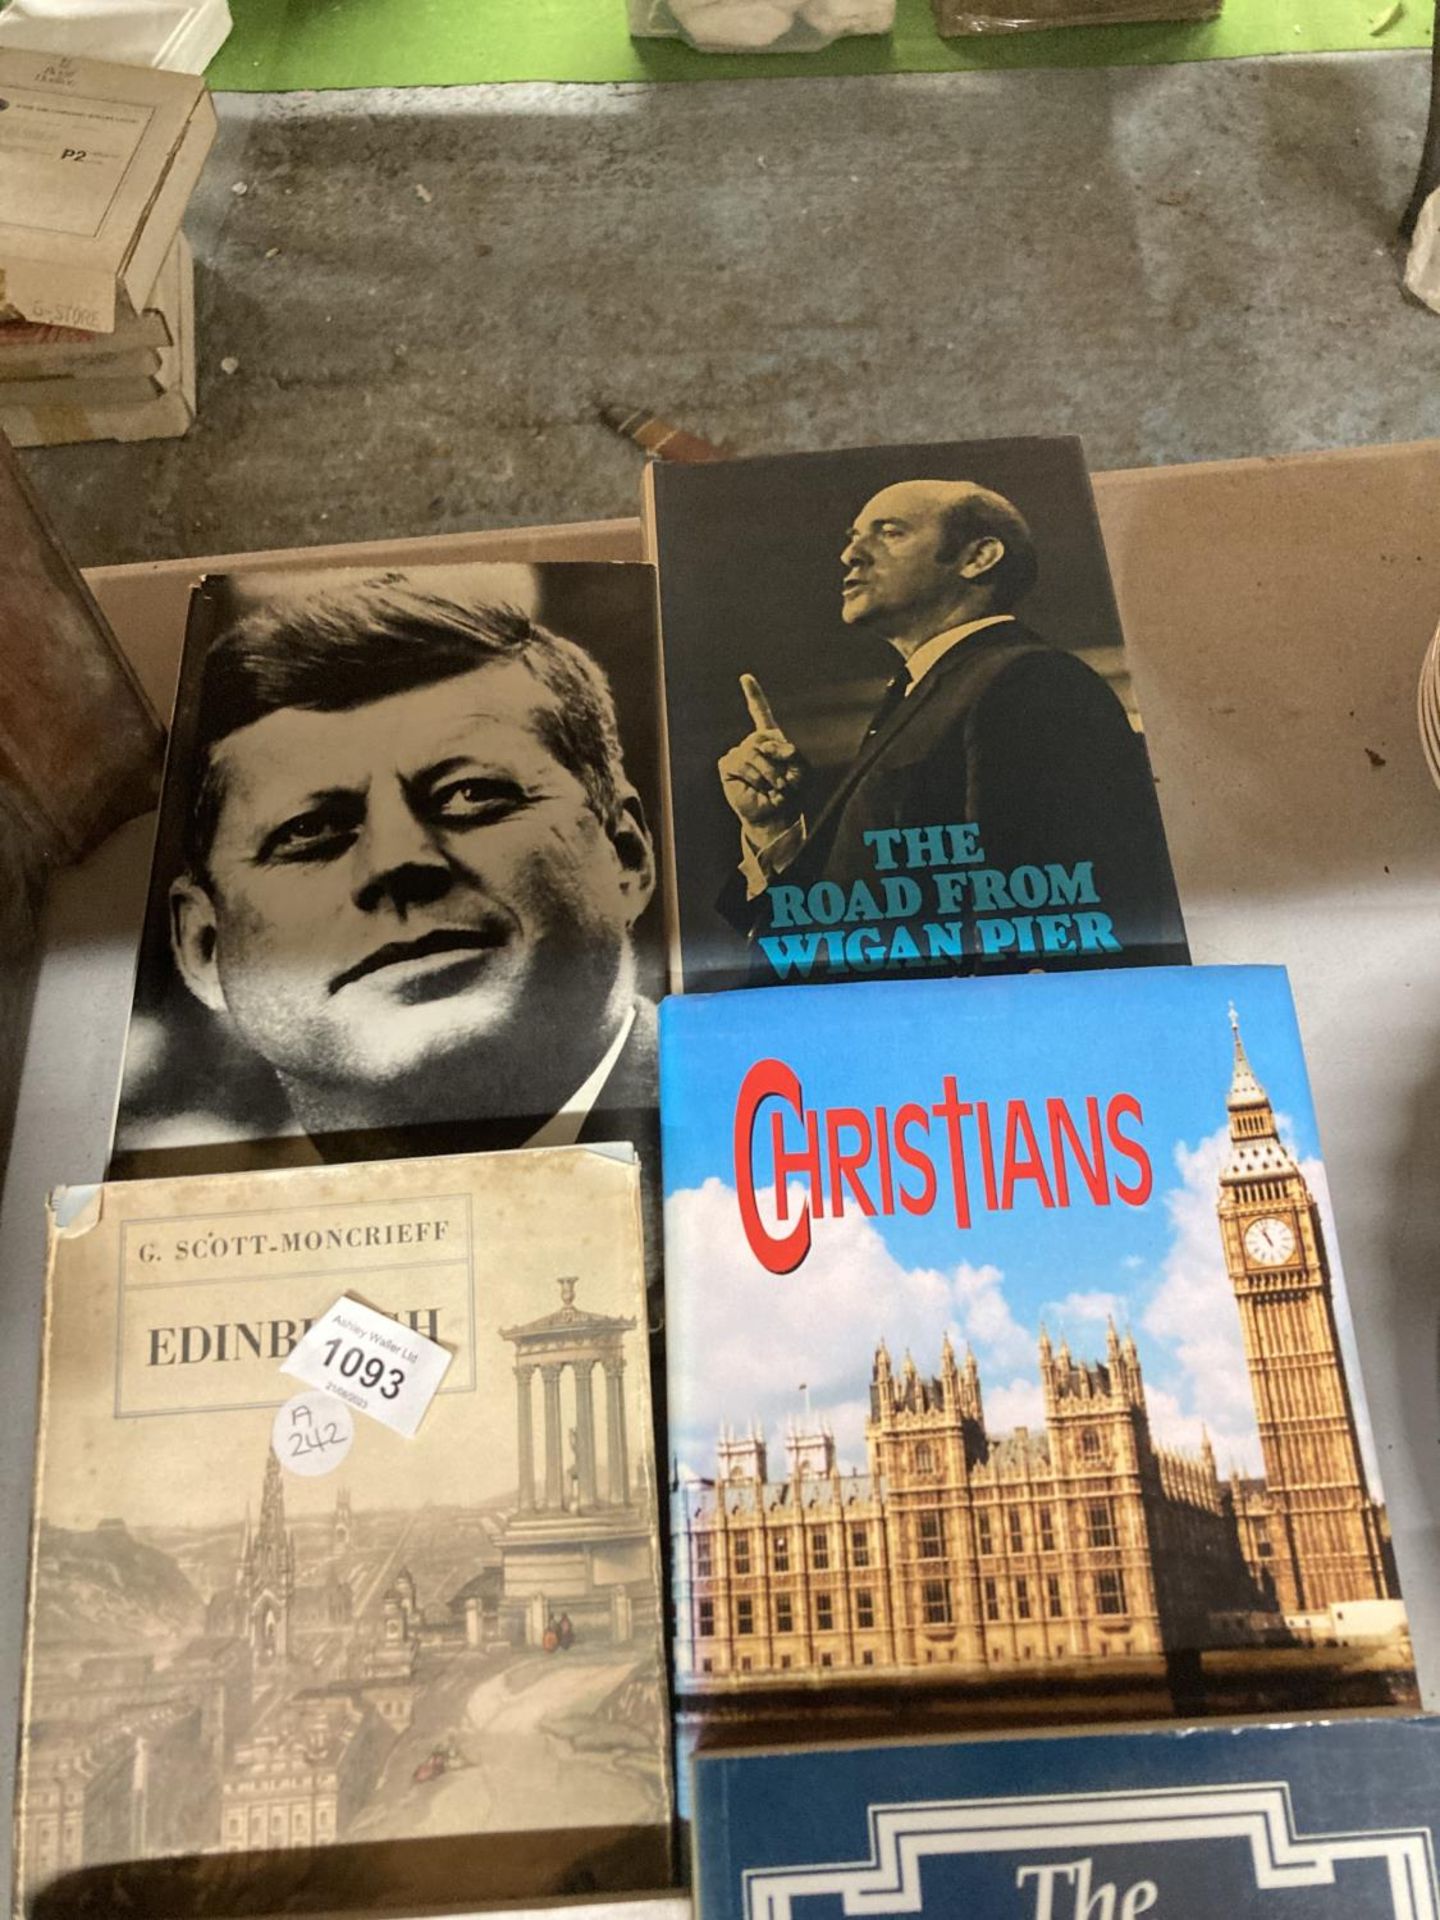 A GROUP OF BOOKS, JFK, CHRISTIANS ETC - Image 2 of 3